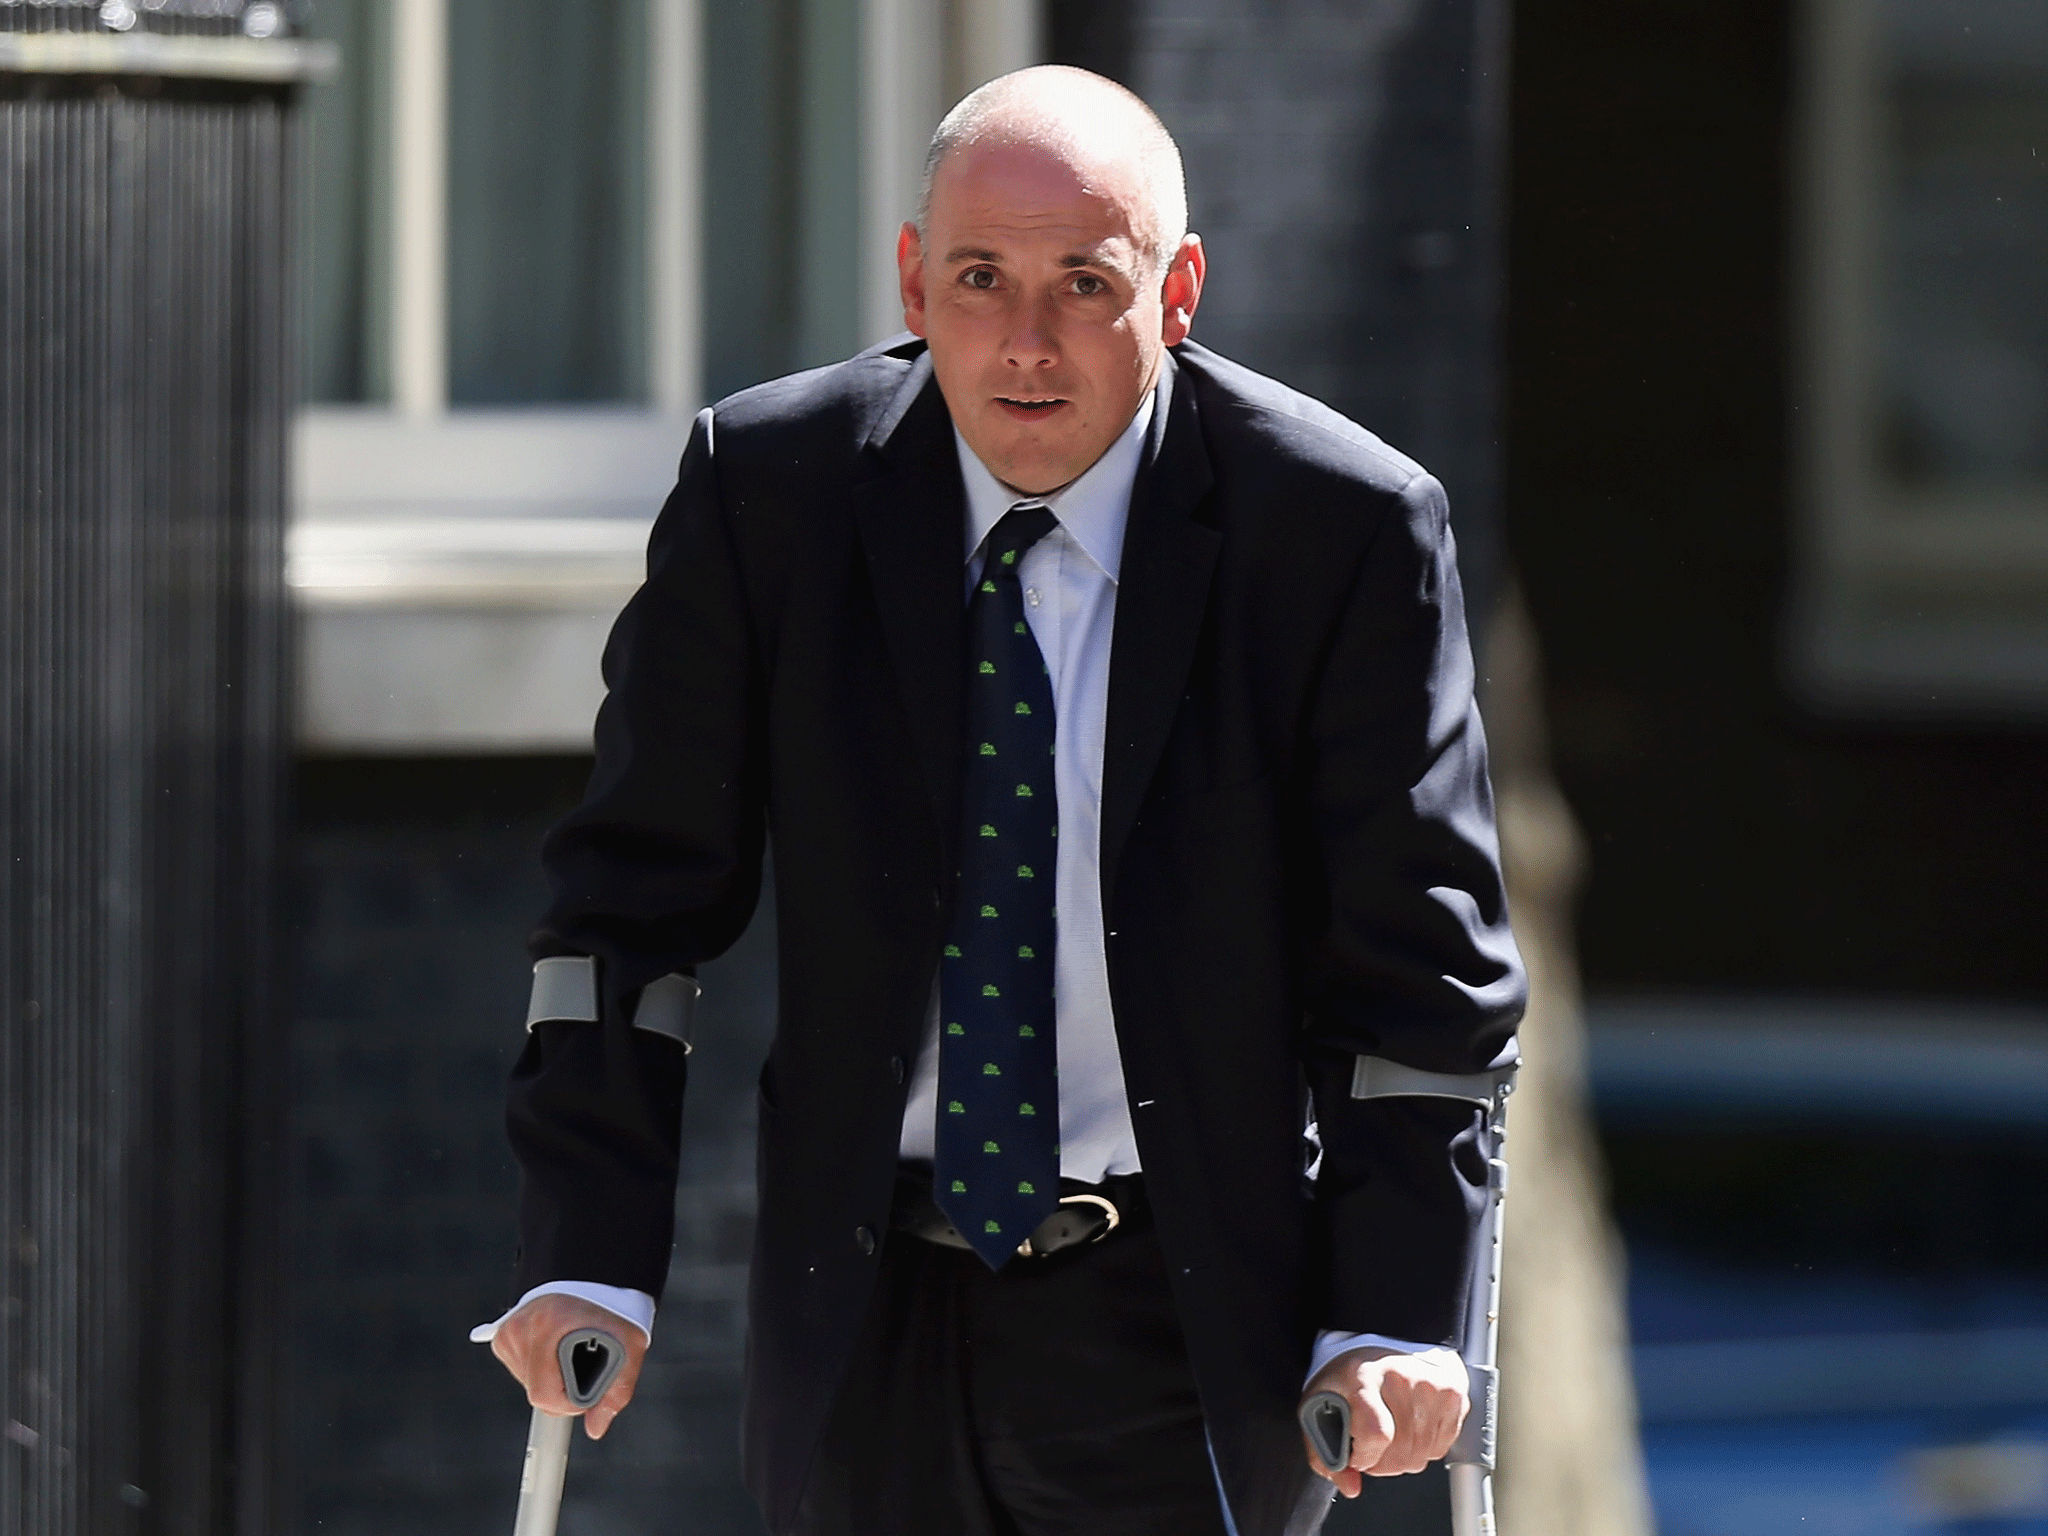 Tory Minister Robert Halfon suffers from mild cerebral palsy and osteoarthritis